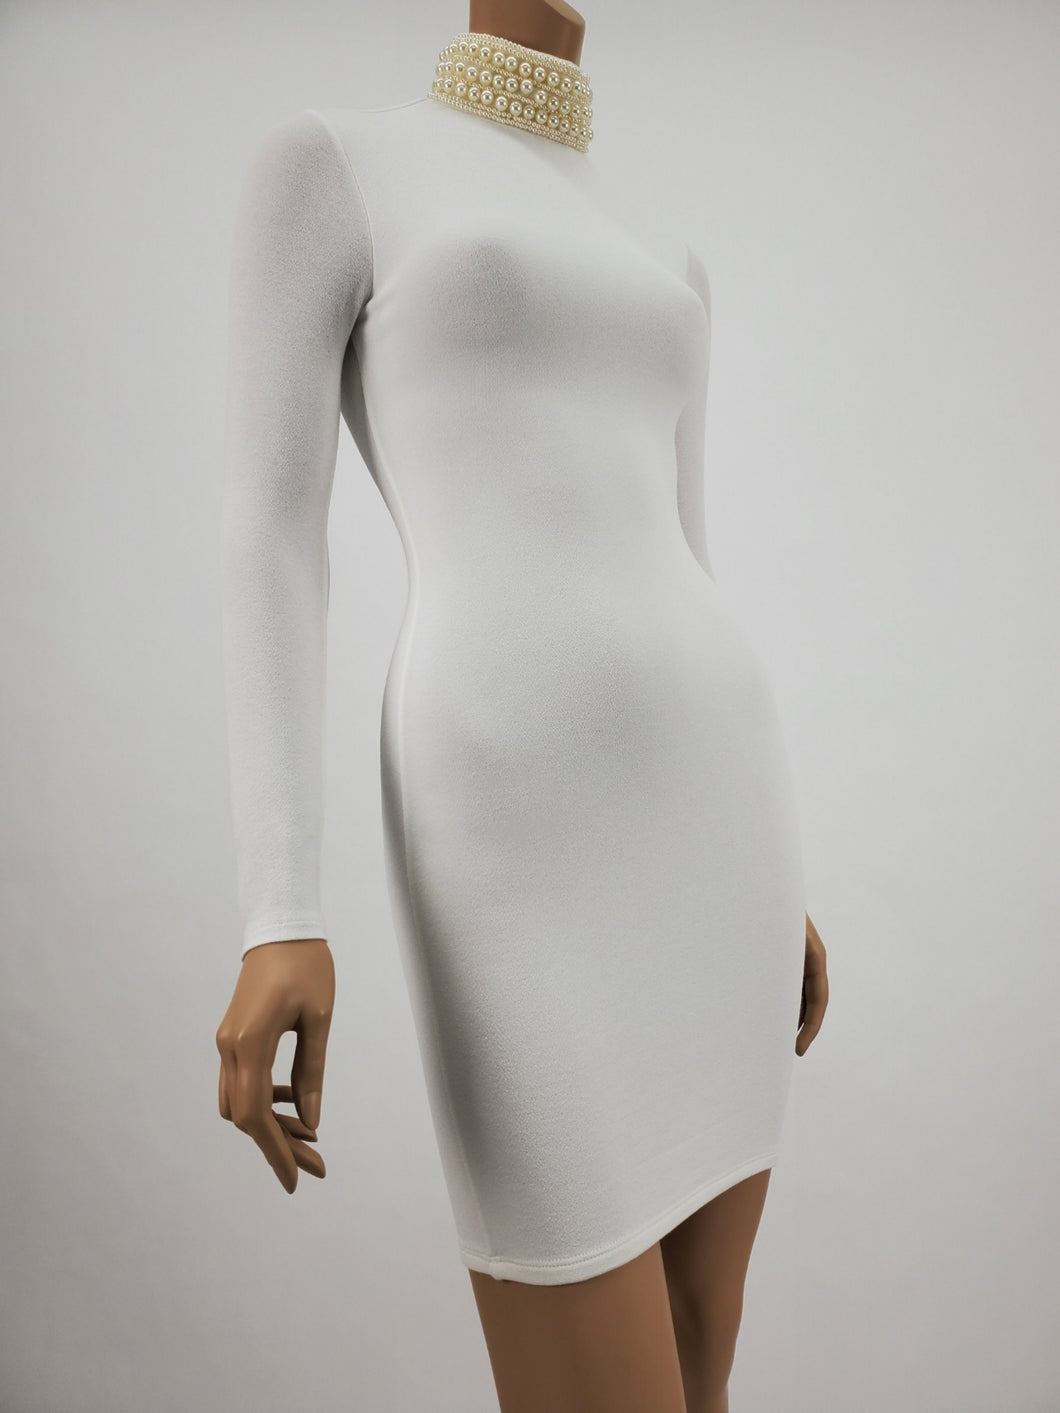 Long Sleeve Dress With Pearl Neckline (White)